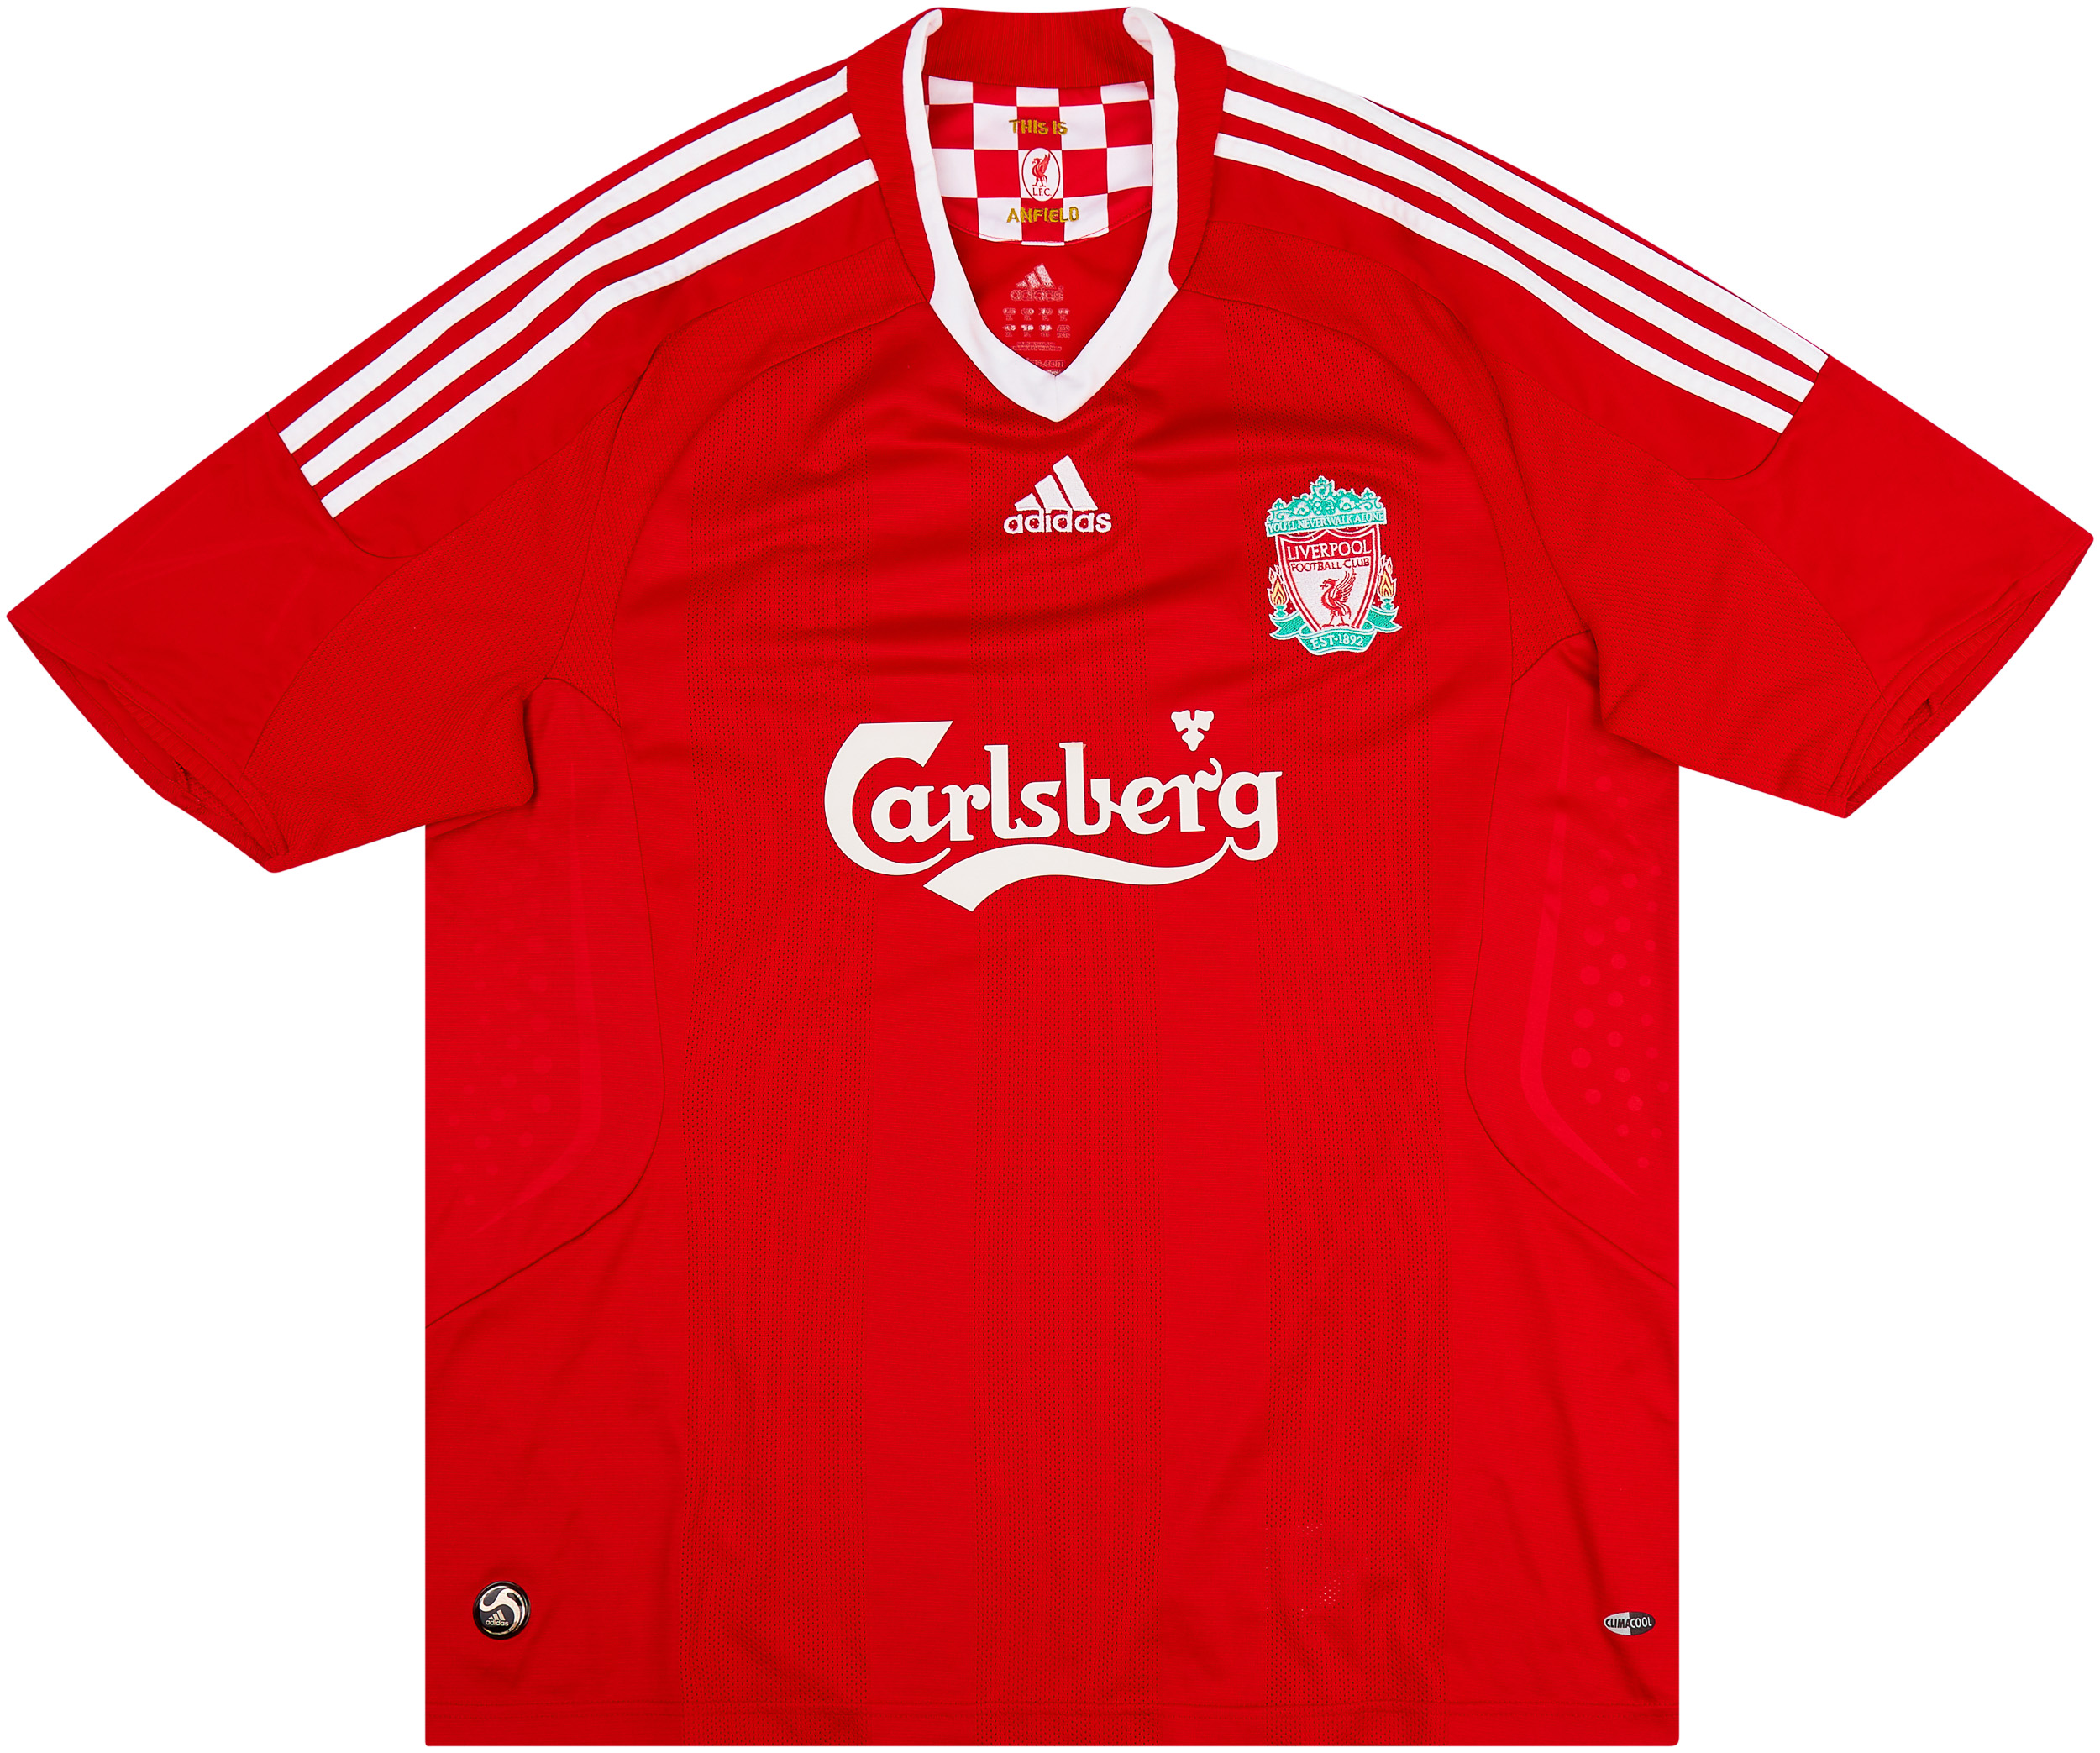 2008-10 Liverpool Home Shirt - Excellent 8/10 - ()